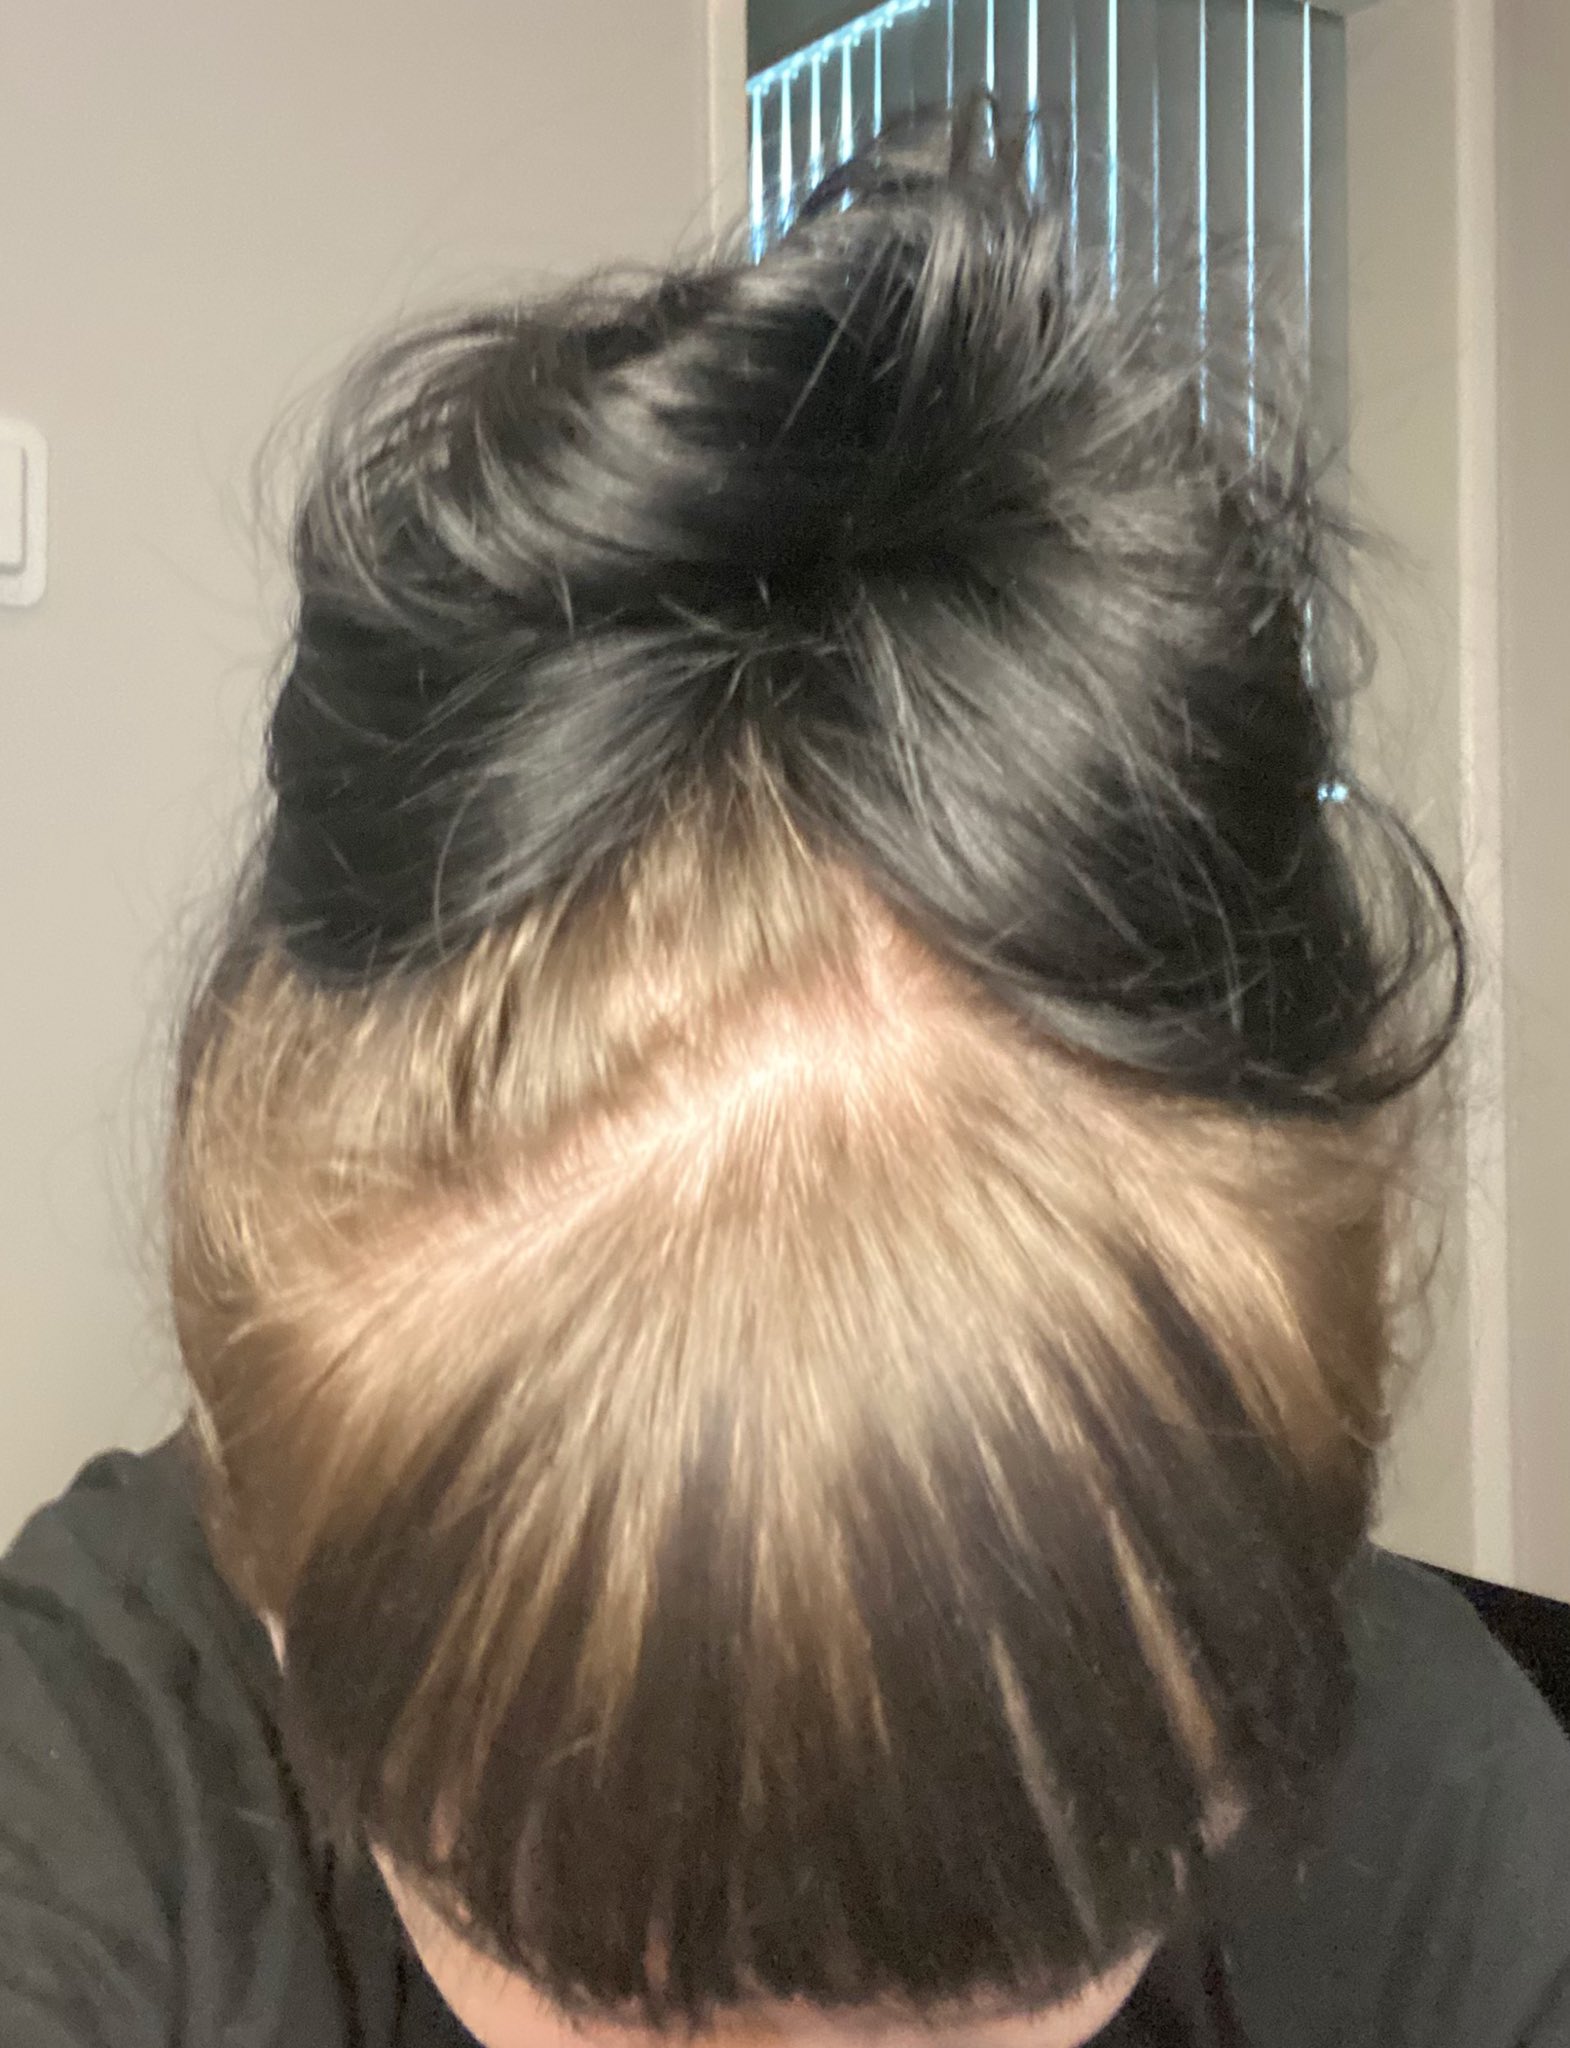 medarbejder Forkæl dig Hælde Rachel Heine on Twitter: "My v light roots are coming in and I wanna play  around with lightening my dyed-dark-for-a-decade hair. At home. Hair  experts: what would you recommend? https://t.co/SnNaZ4KvoD" / Twitter